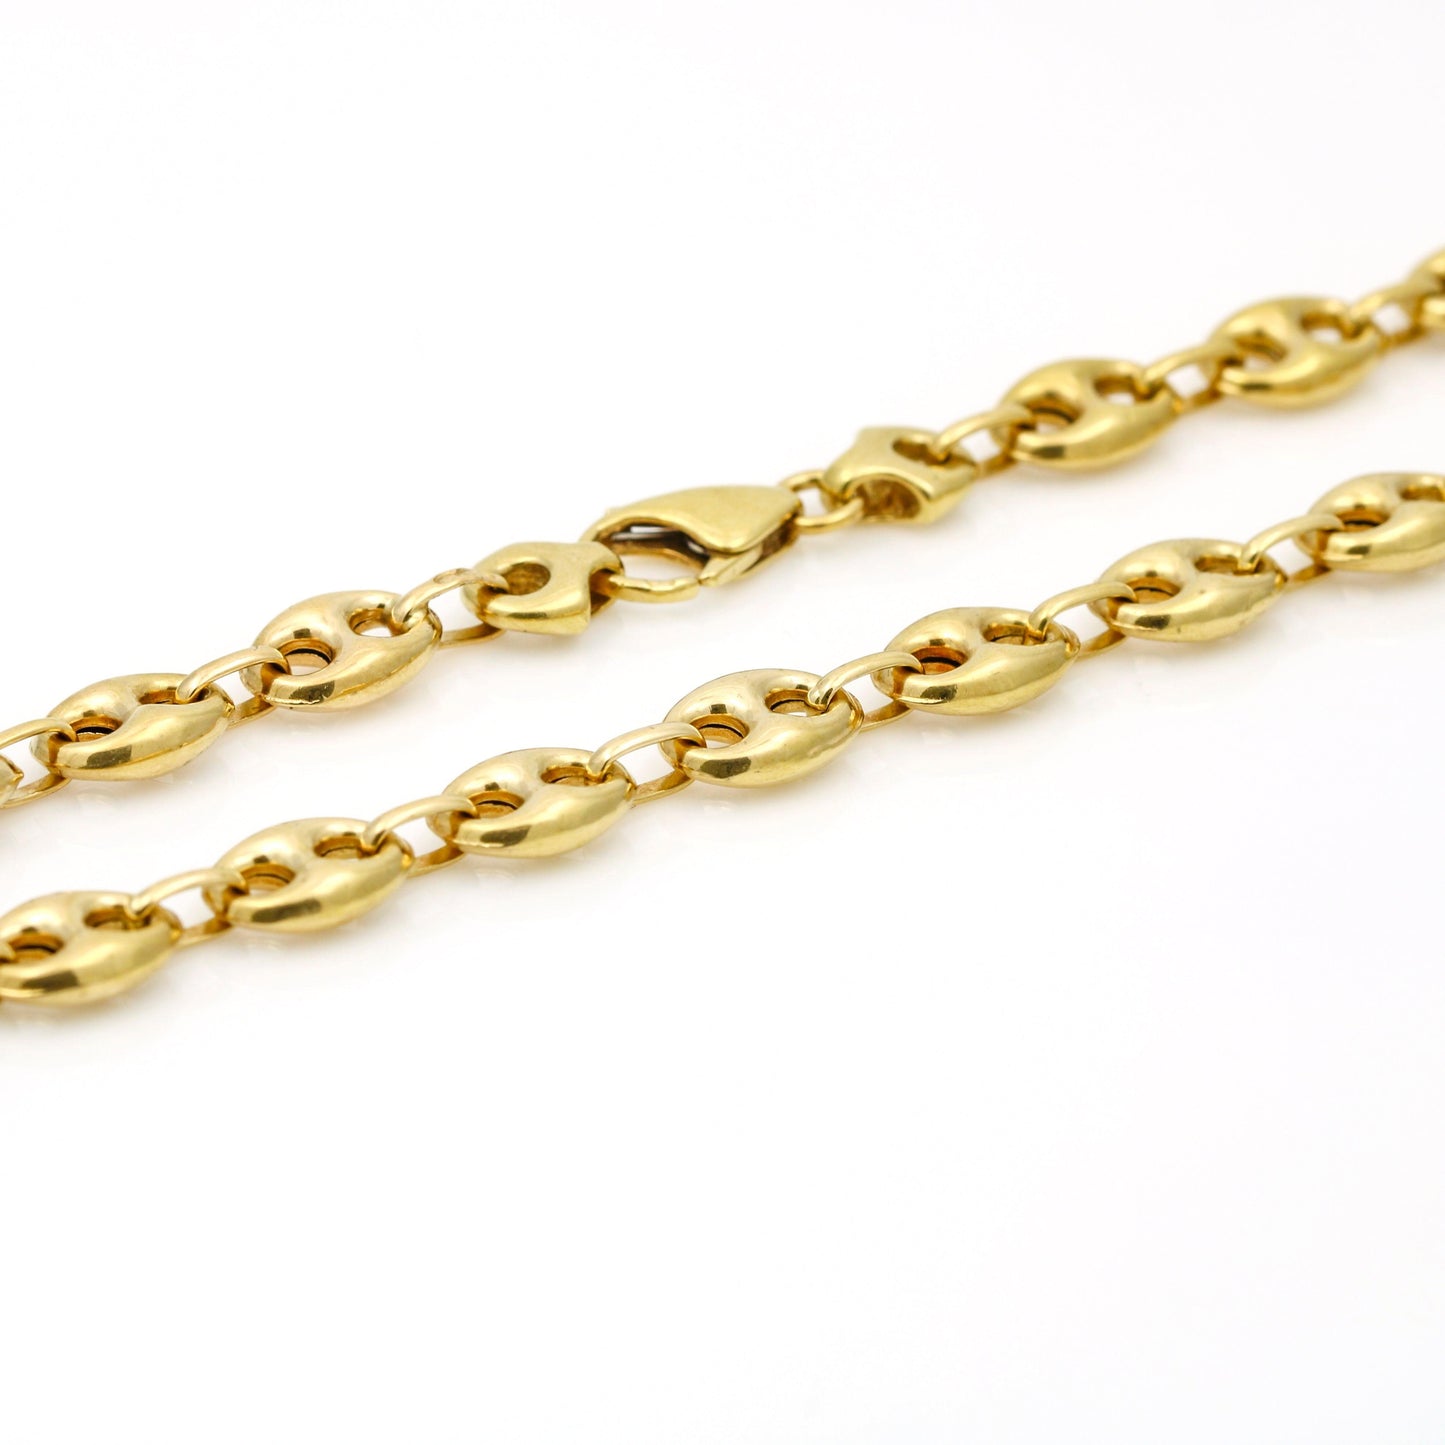 Mariner's Puff Link 8.5mm 18k Yellow Gold Chain Necklace 24" - 31 Jewels Inc.